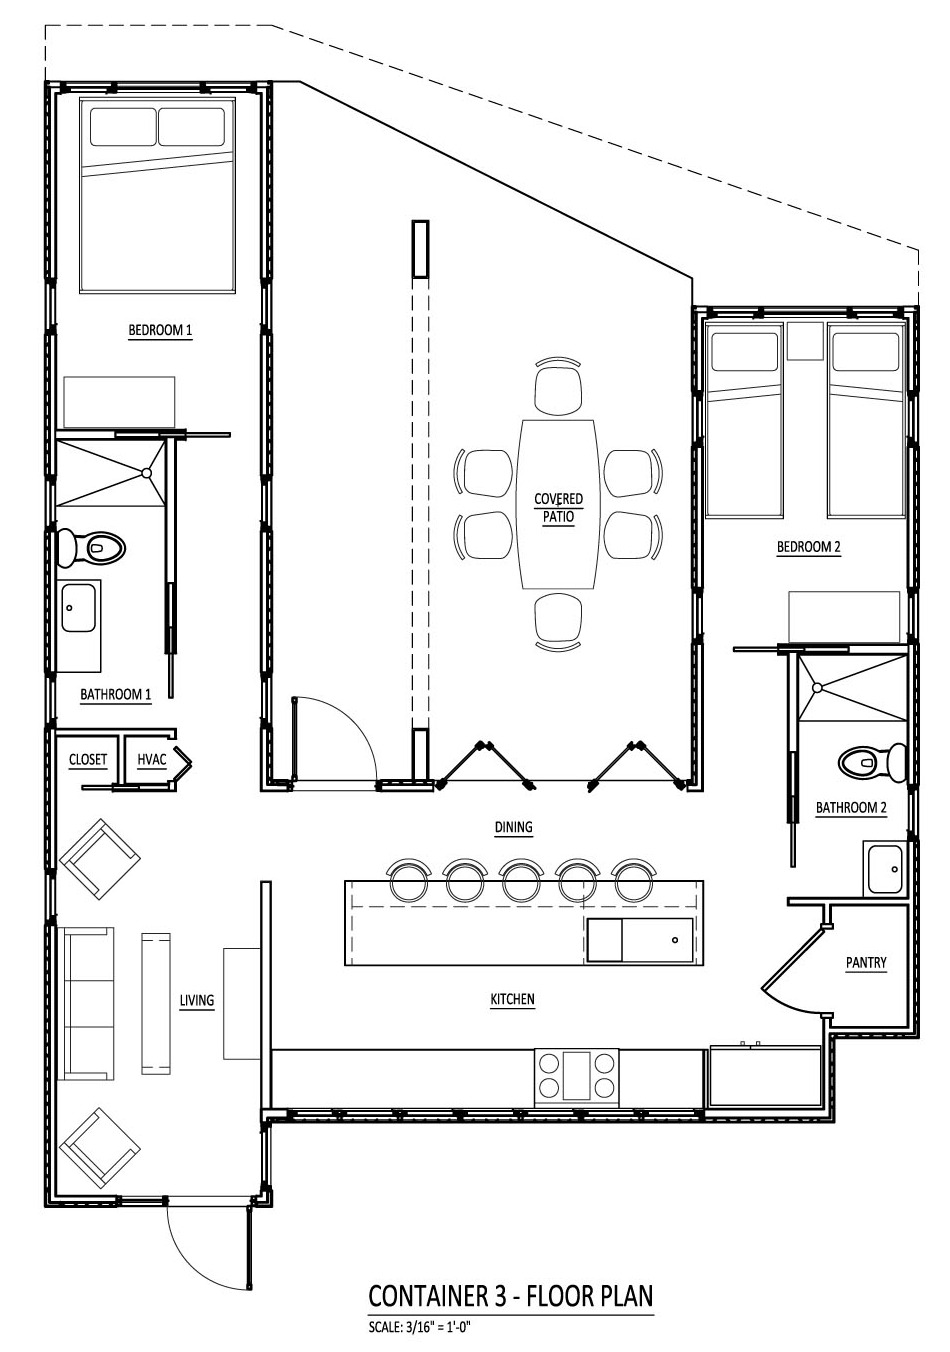 Floor plan for a home using three shipping containers in a "U 